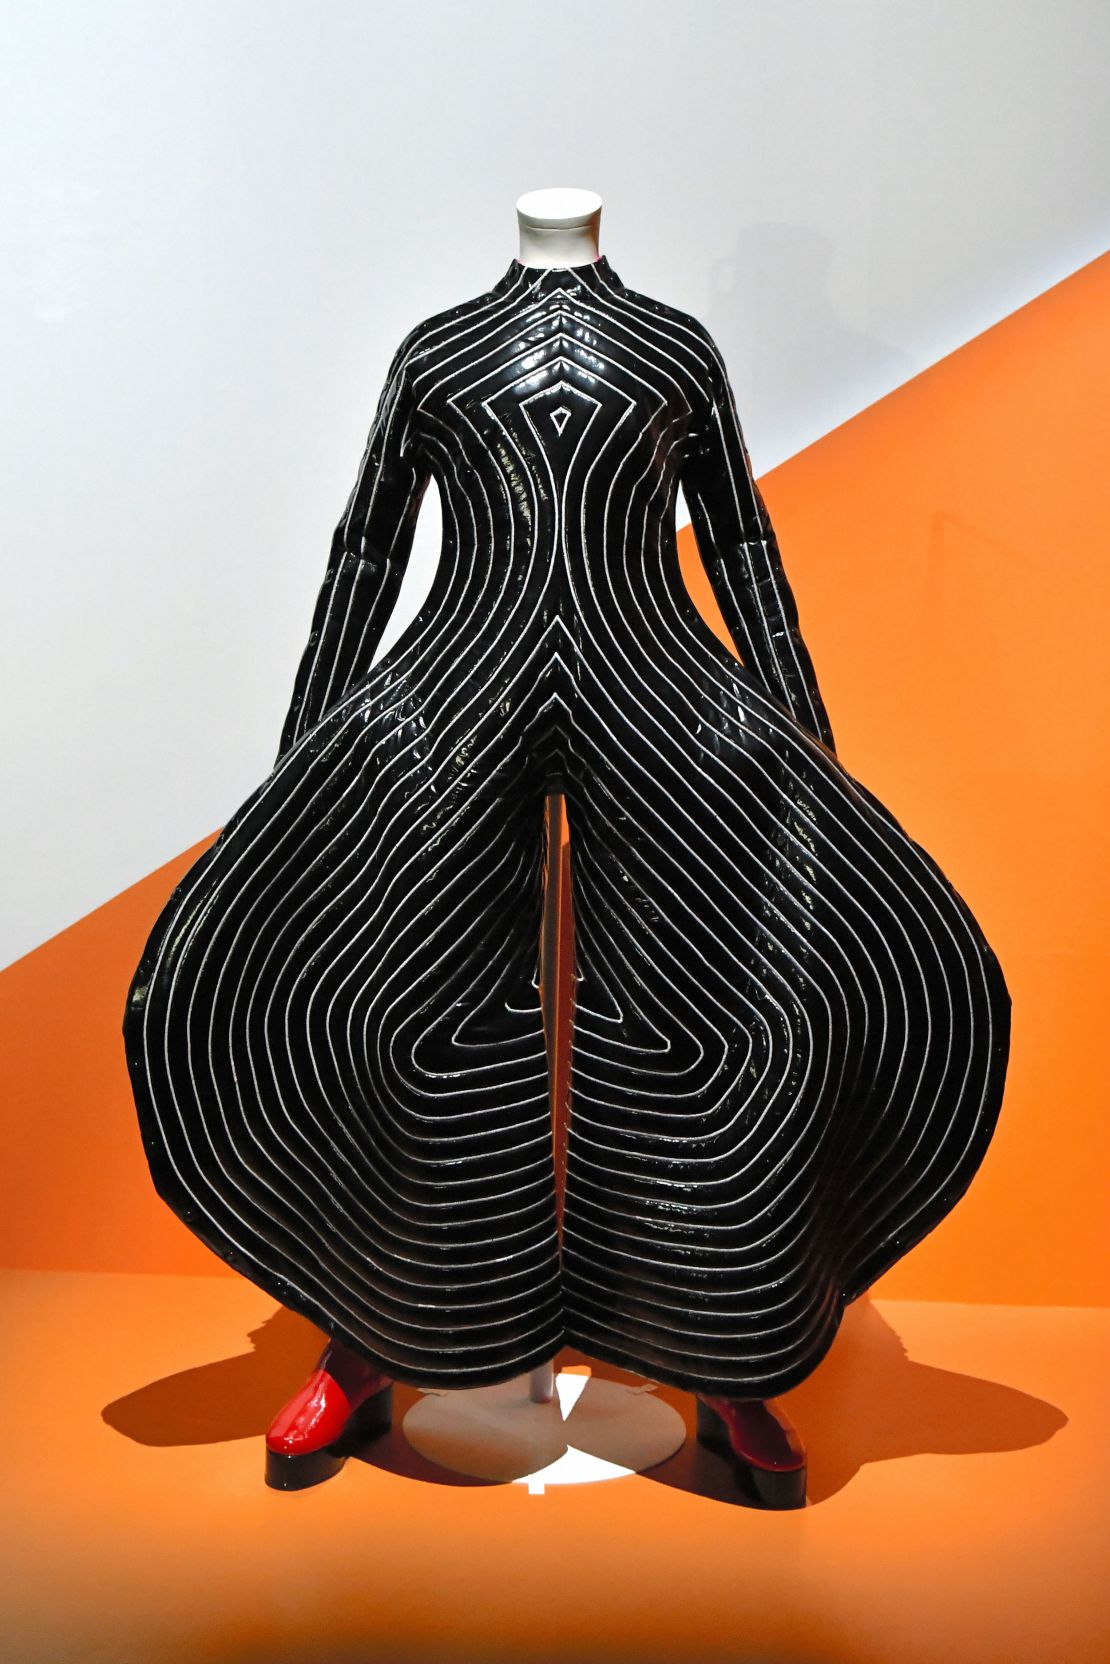 The divisive look was reminiscent of a Kensai Yamamoto design worn by David Bowie during his 1973 Ziggy Stardust tour. 